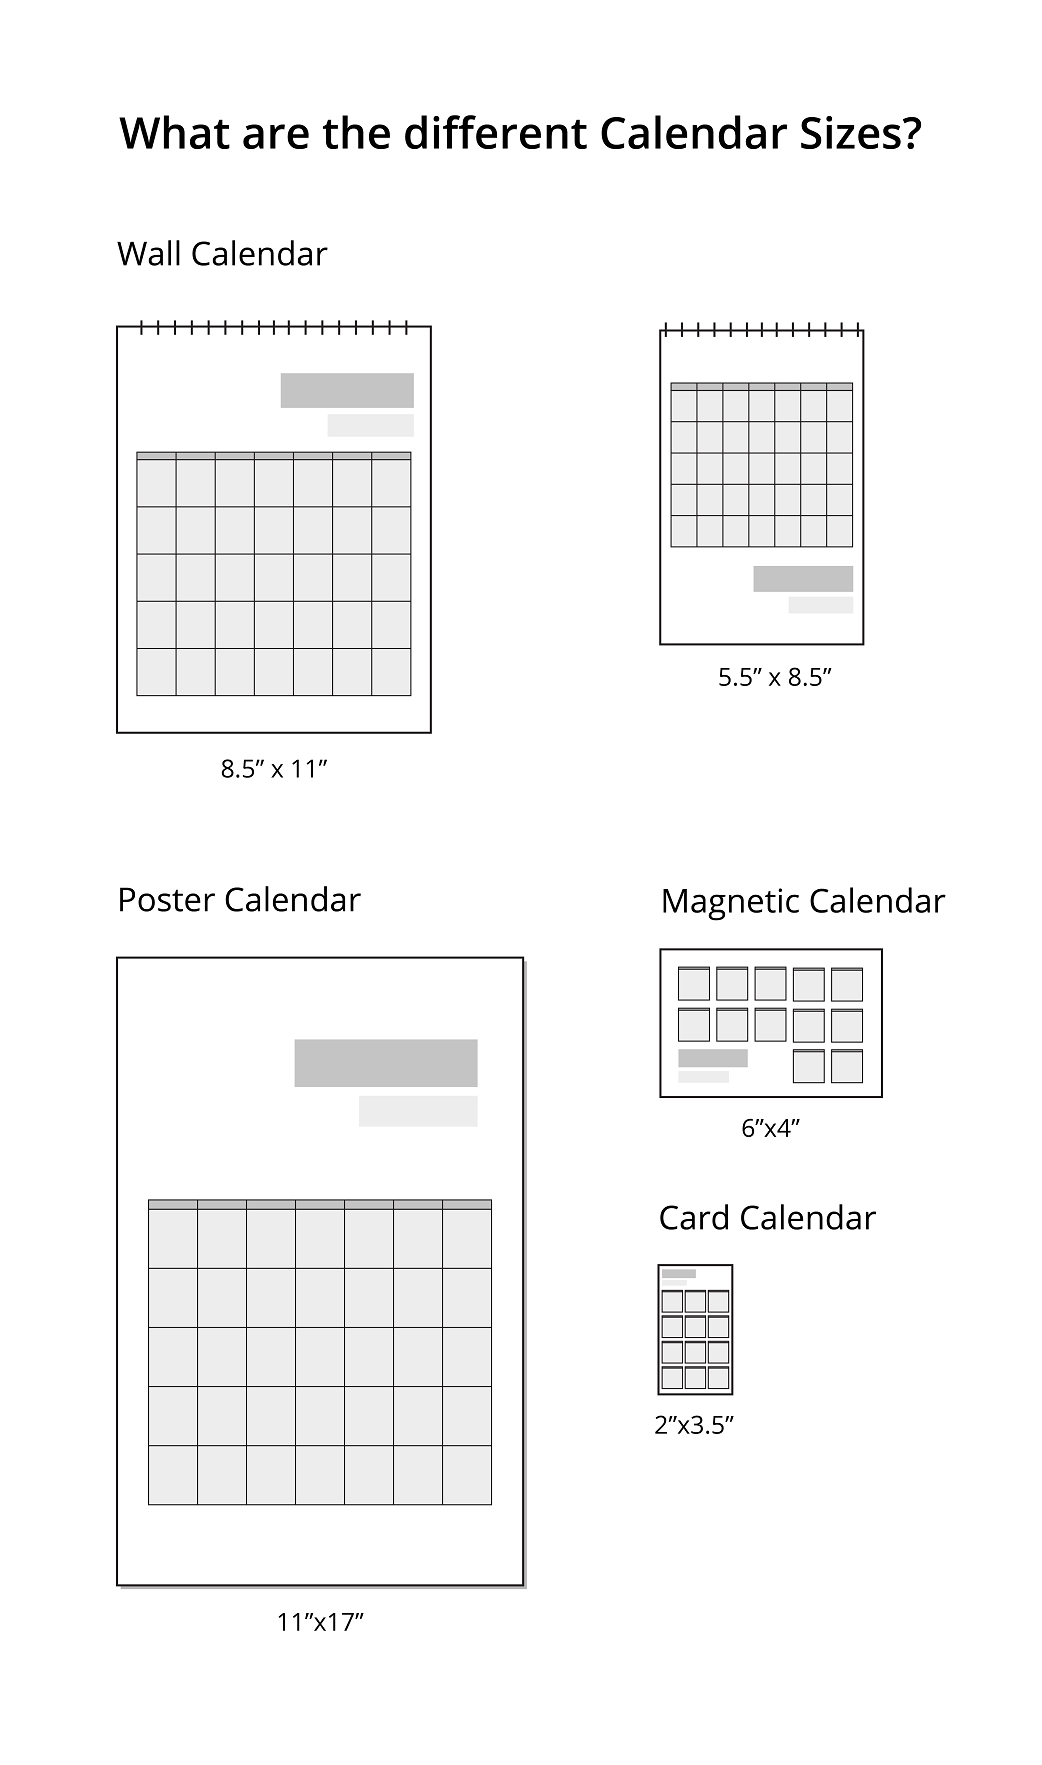 Promotional One Page Year Calendars 8.5 X 11 Calendar Inspiration Design within 8.5” X 11” Page